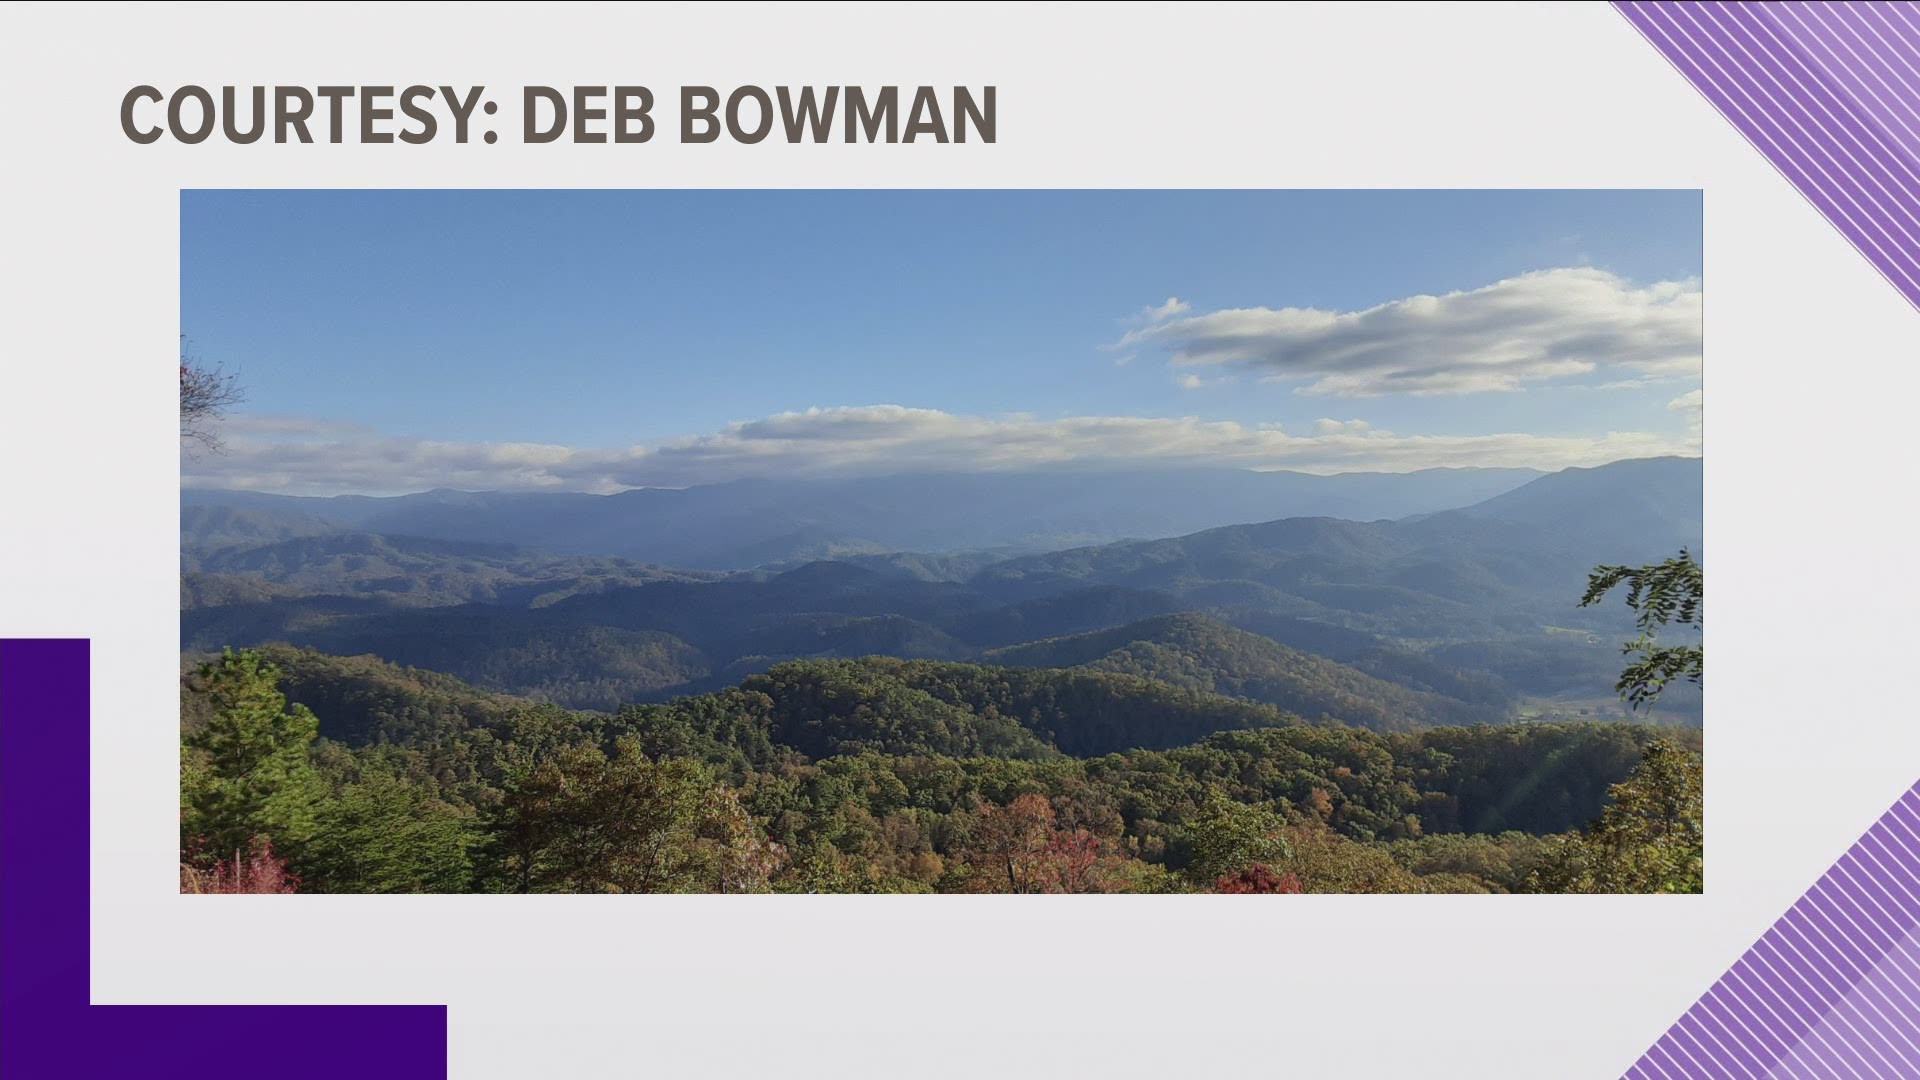 WBIR viewers have been submitting wonderful photos of the Smokies.